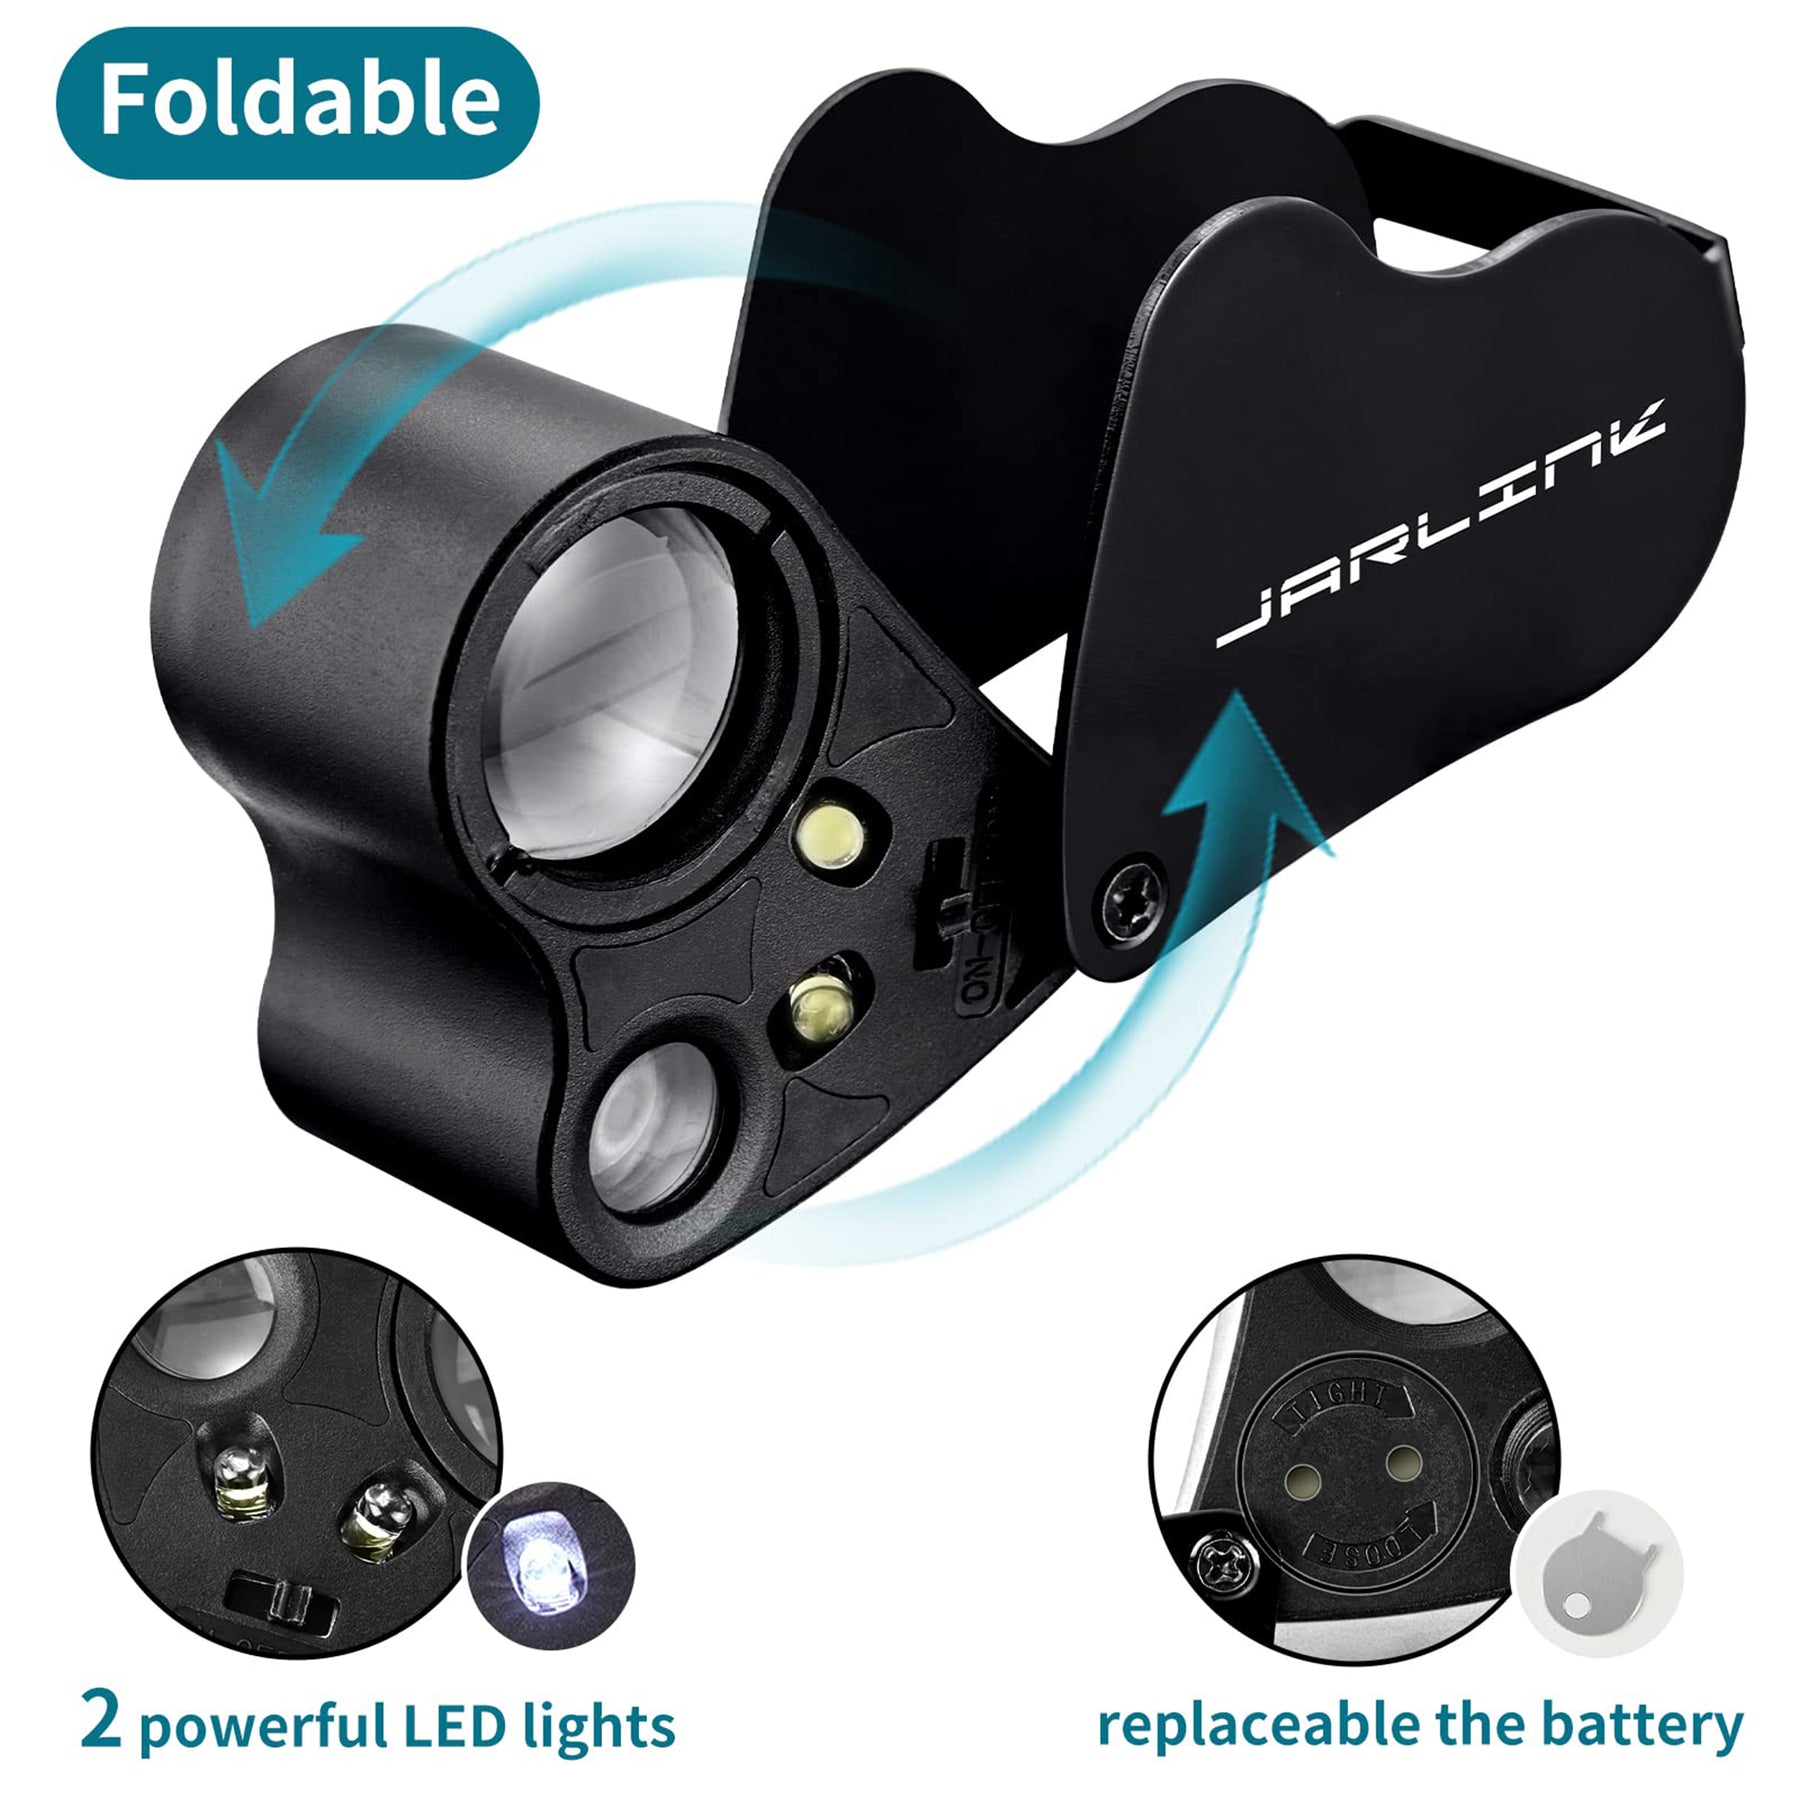 JARLINK 30X 60X Illuminated Jewelers Loupe Magnifier, Foldable Jewelry  Magnifier with Bright LED Light for Gems, Jewelry, Coins, Stamps, etc